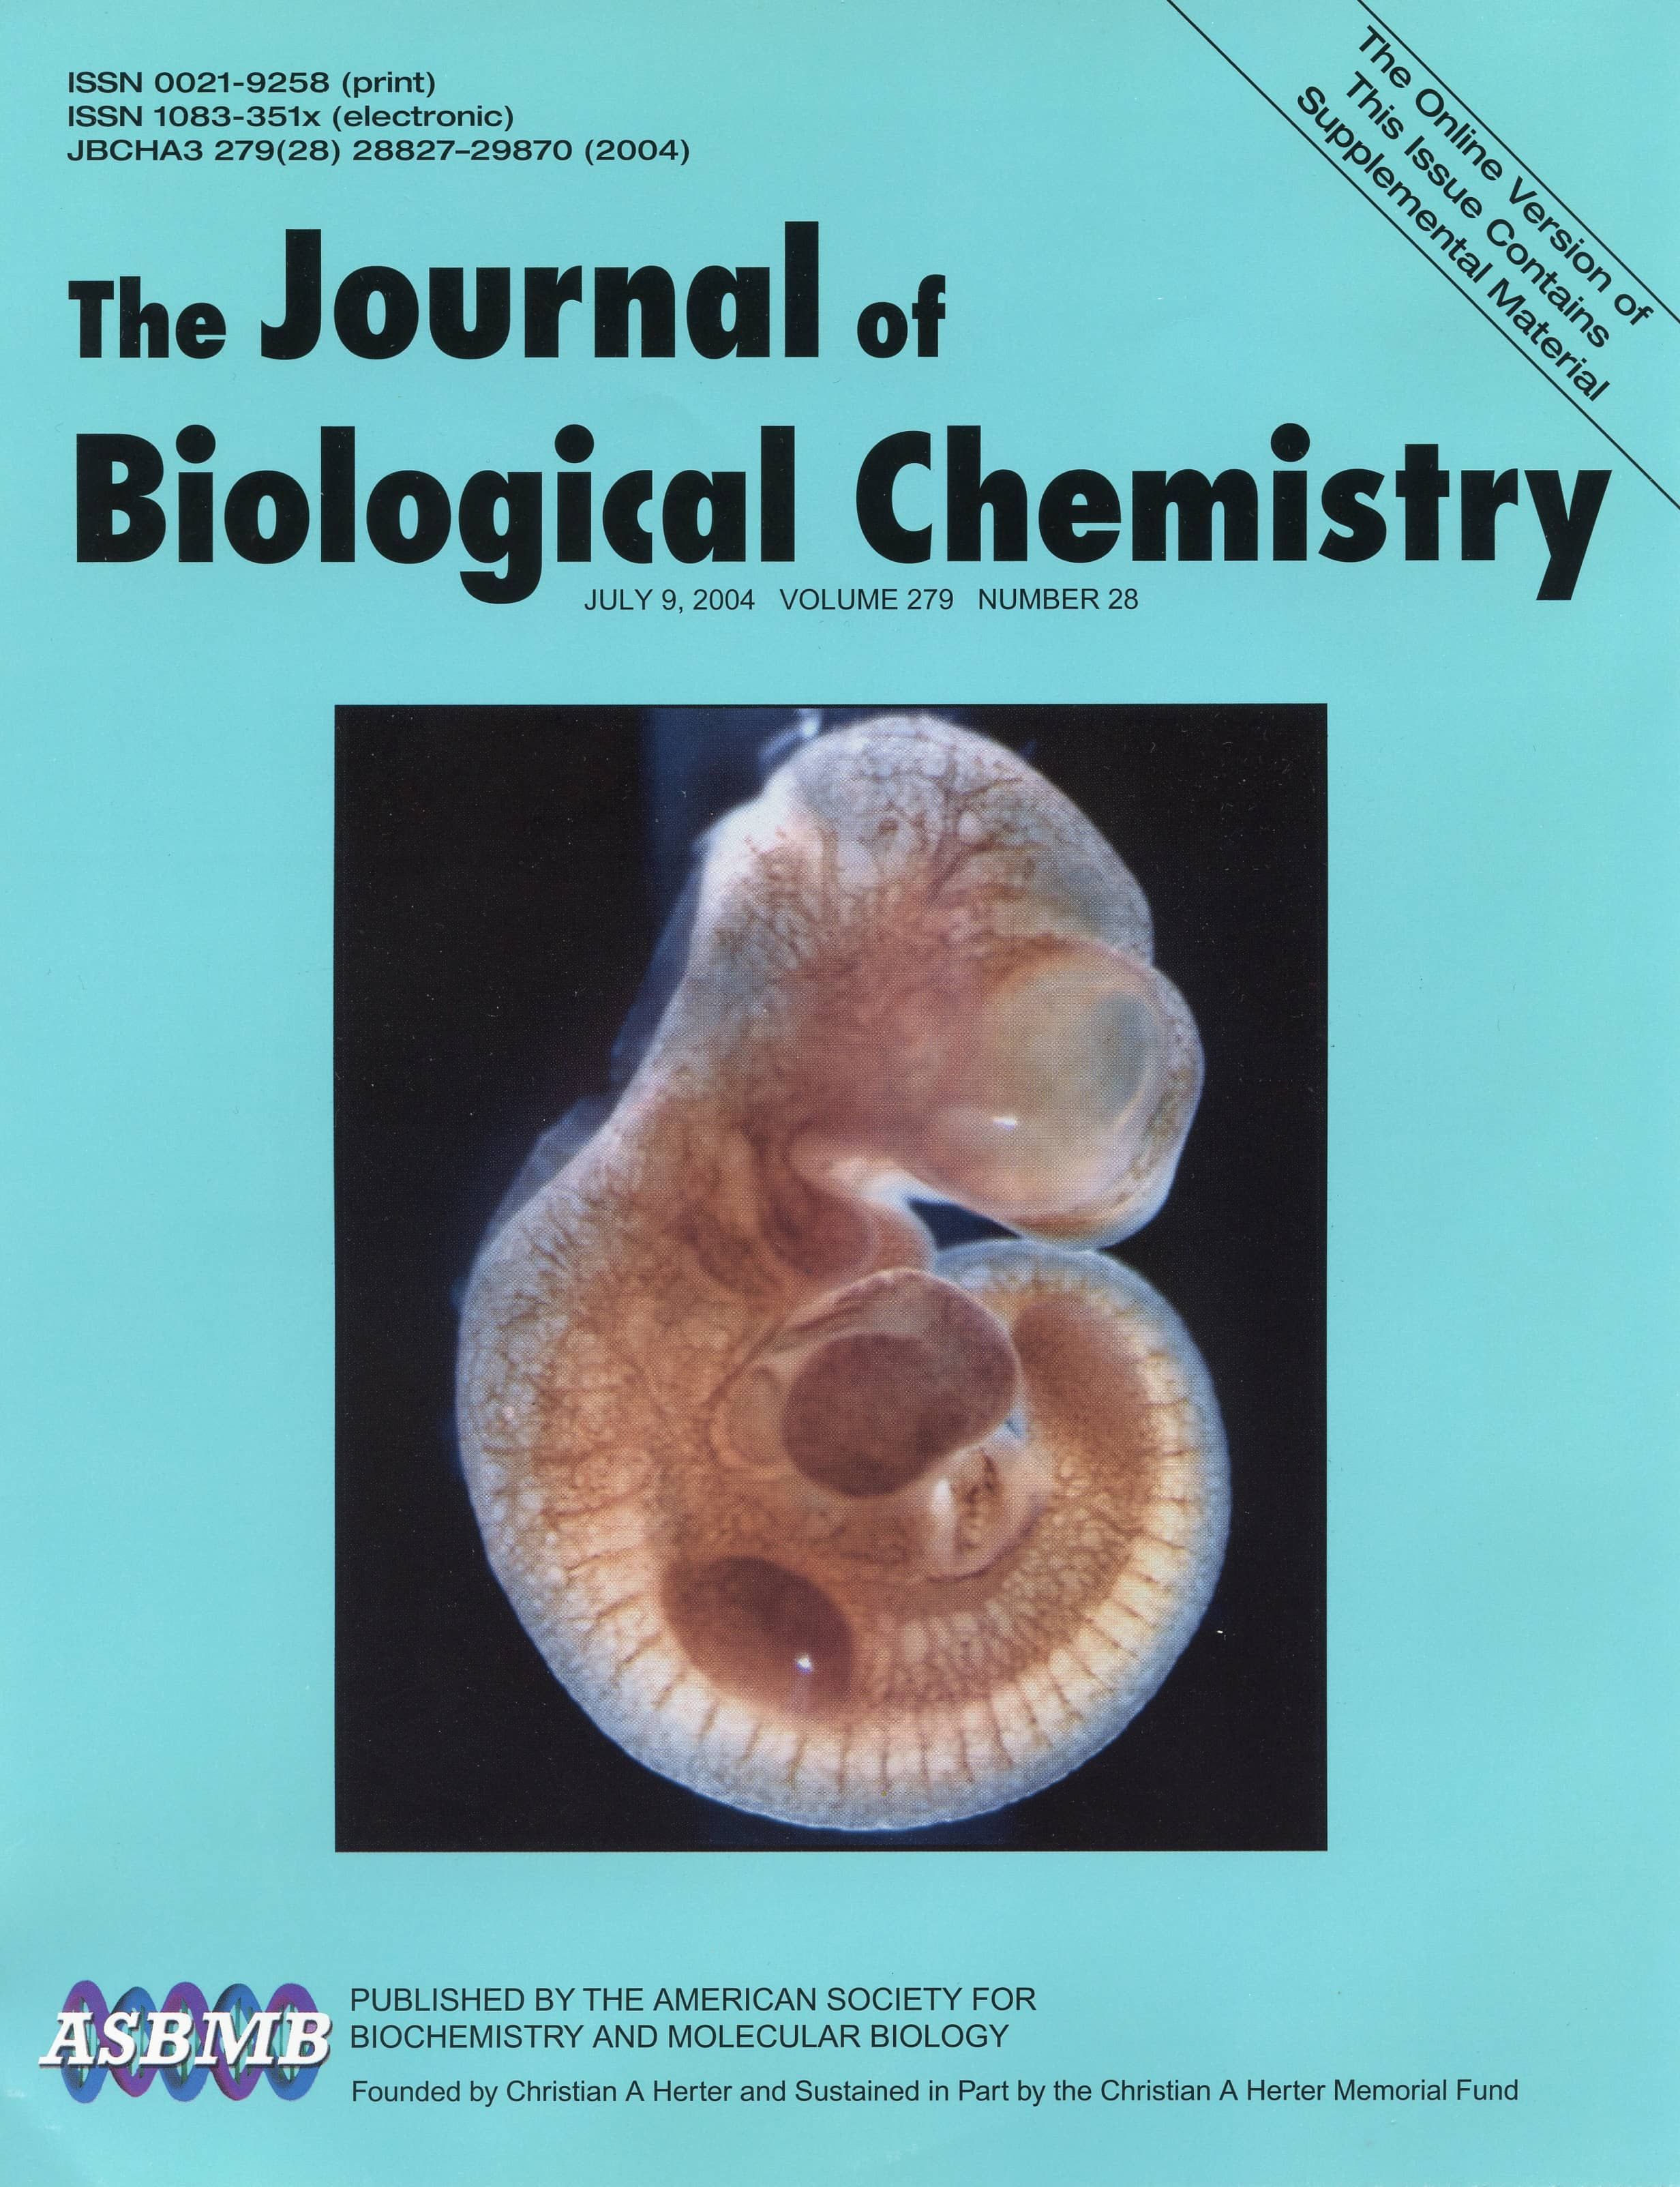 2004 cover of the Journal of Biological Chemistry.